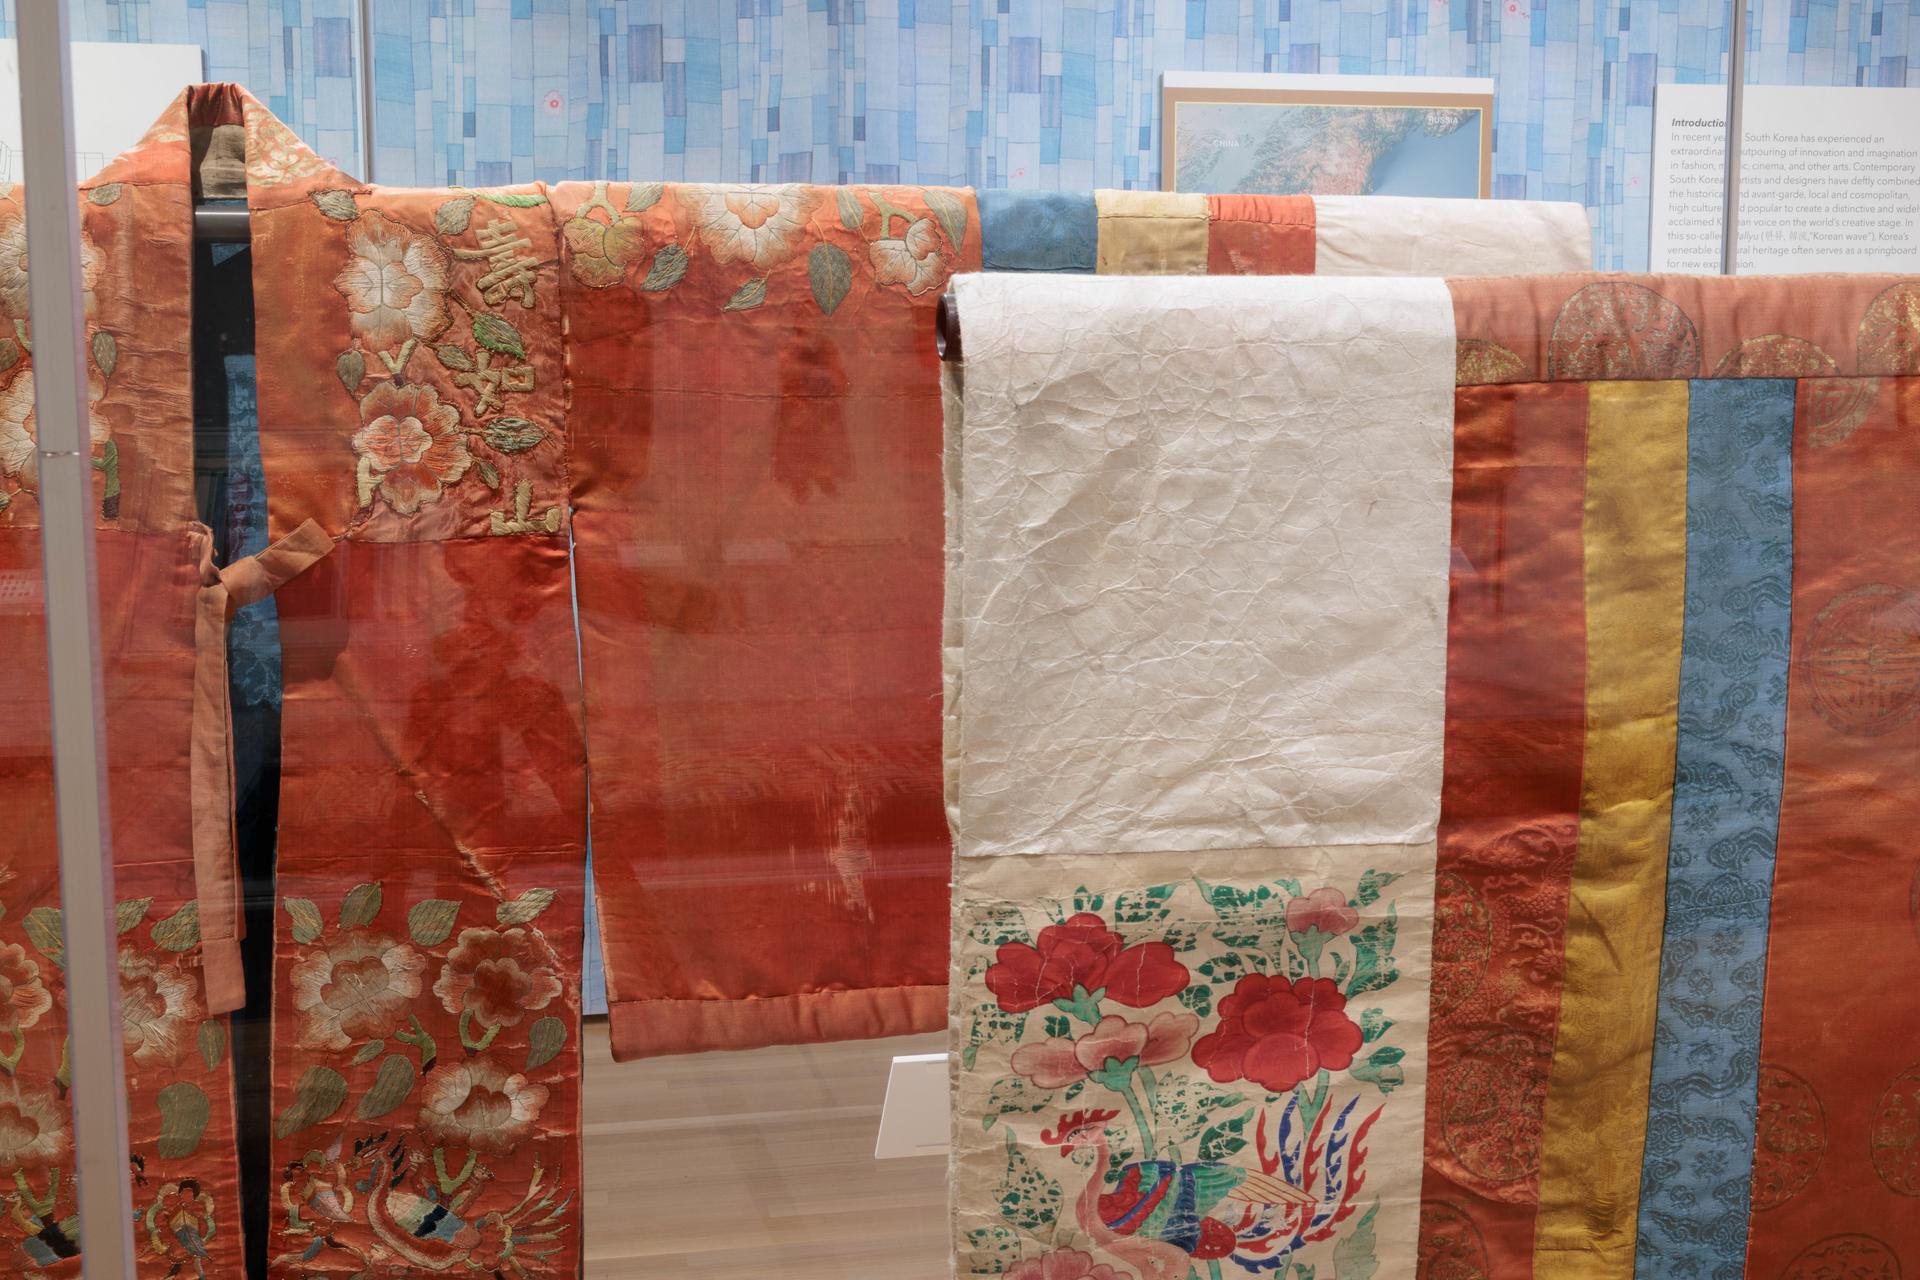 Joseon wedding robes on display in "From Royal Court to Runway" feature ornate embroidery and patchwork techniques. (William Atk